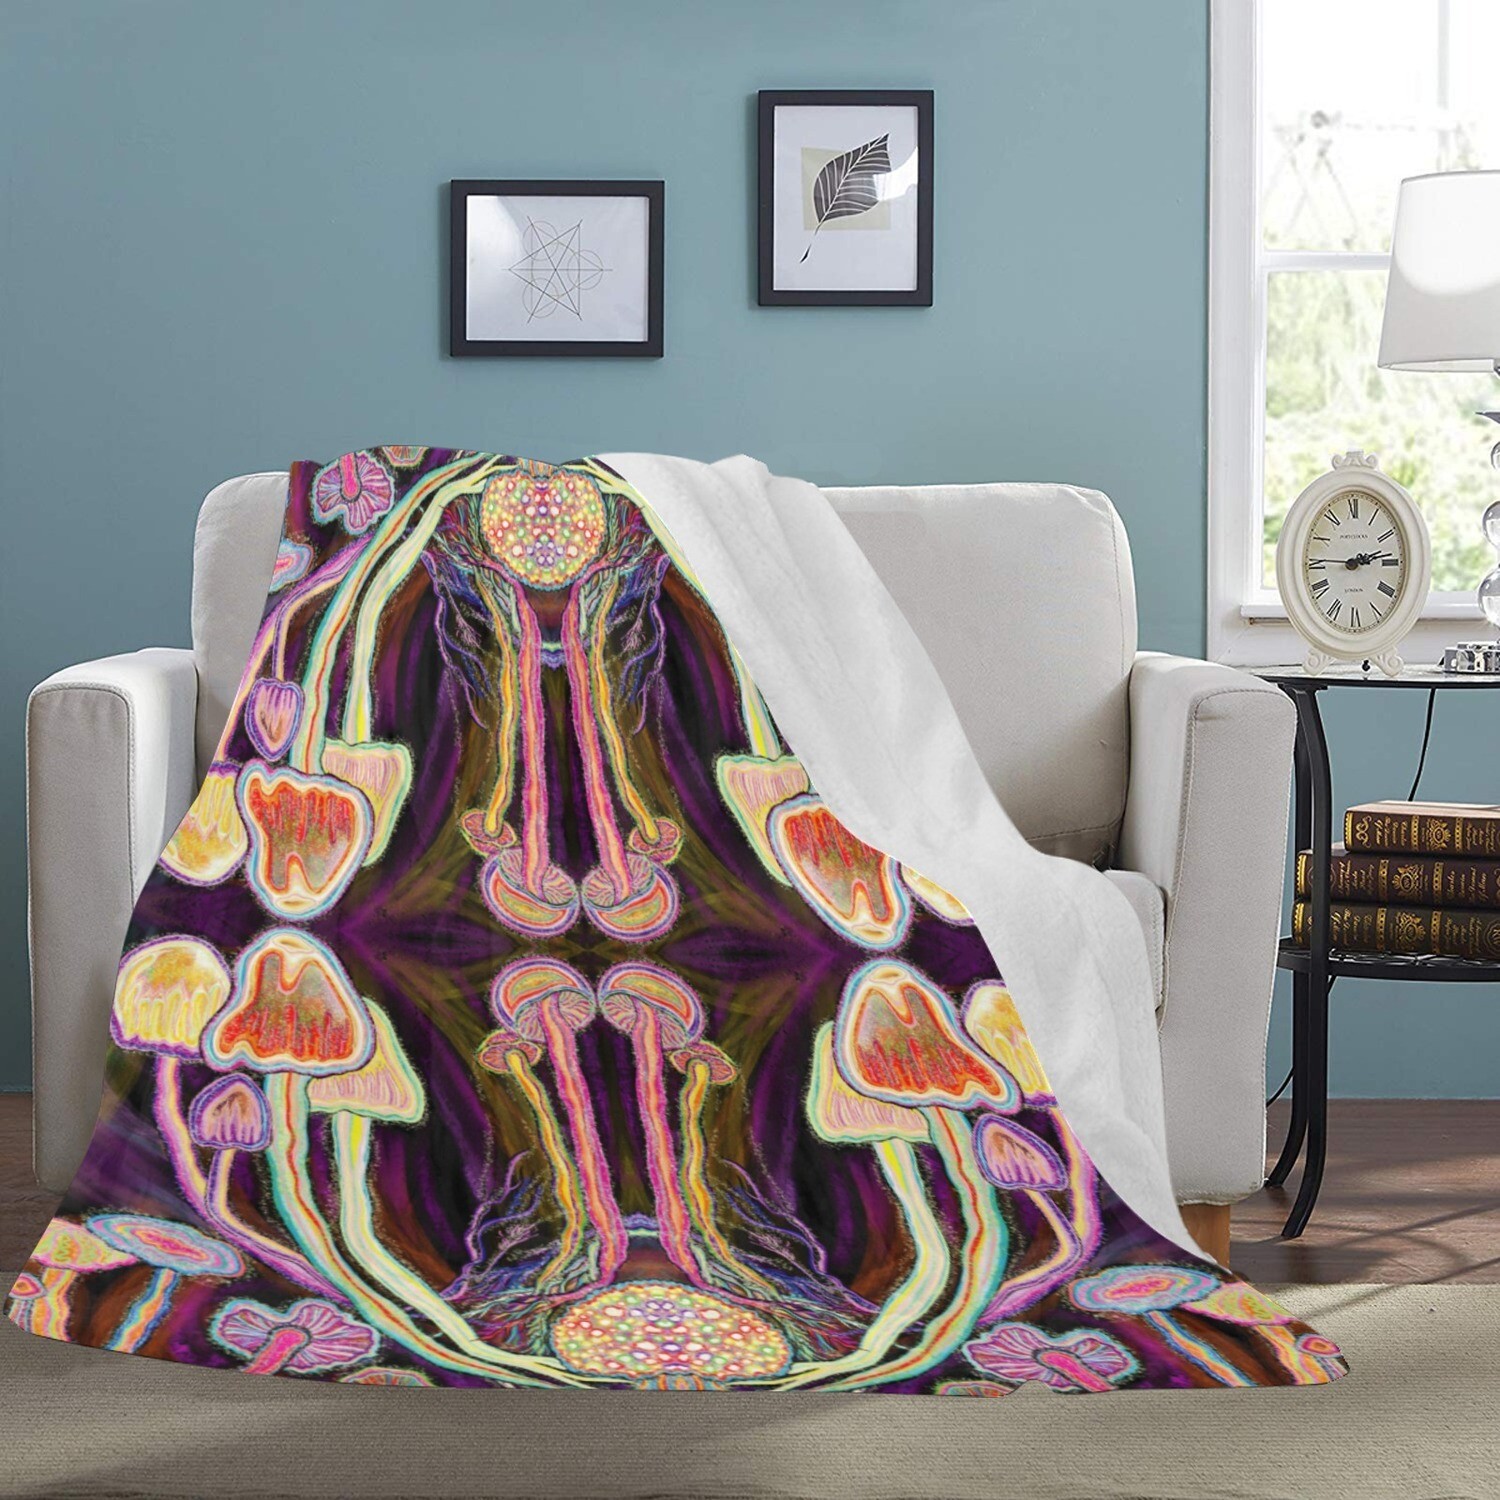 🤴🏽👸🏽🍄Large Ultra-Soft Micro Fleece Blanket Psychadelic Mushrooms by Maru, gift, gift for her, gift for him, gift for them, 70"x80" II